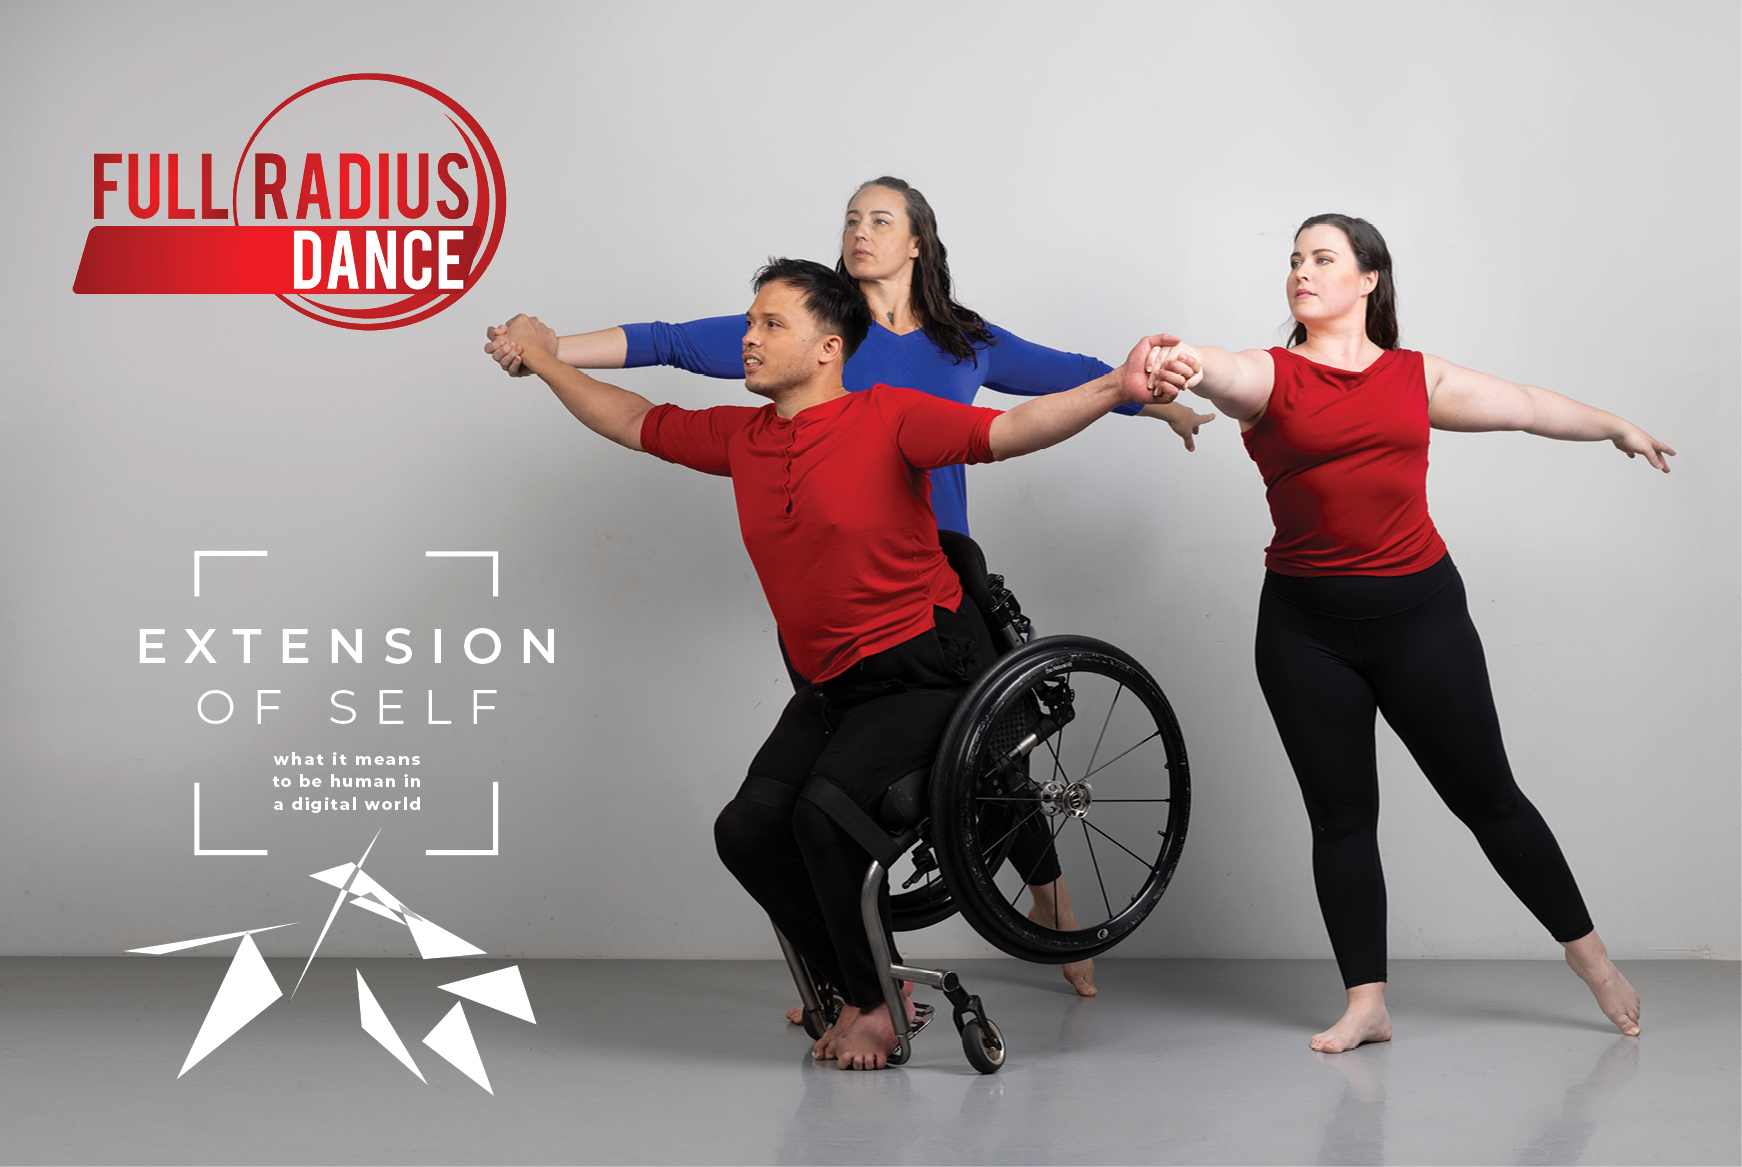 (From left to right) Ashlee Jo Ramsey-Borunov, Peter L. Trojic in his wheelchair and Courtney Michelle McClendon of Full Radius Dance are in a posed studio portrait. Ramsey-Borunov and McClendon hold onto Trojic’s hands as he executes a front tilt with his footplate touching the floor and his wheels off the floor. Trojic and McClendon are both clad in cherry-red shirts — three-quarter length sleeves and sleeveless, respectively — and black leggings. Ramsey-Borunov has a deep blue shirt with three-quar